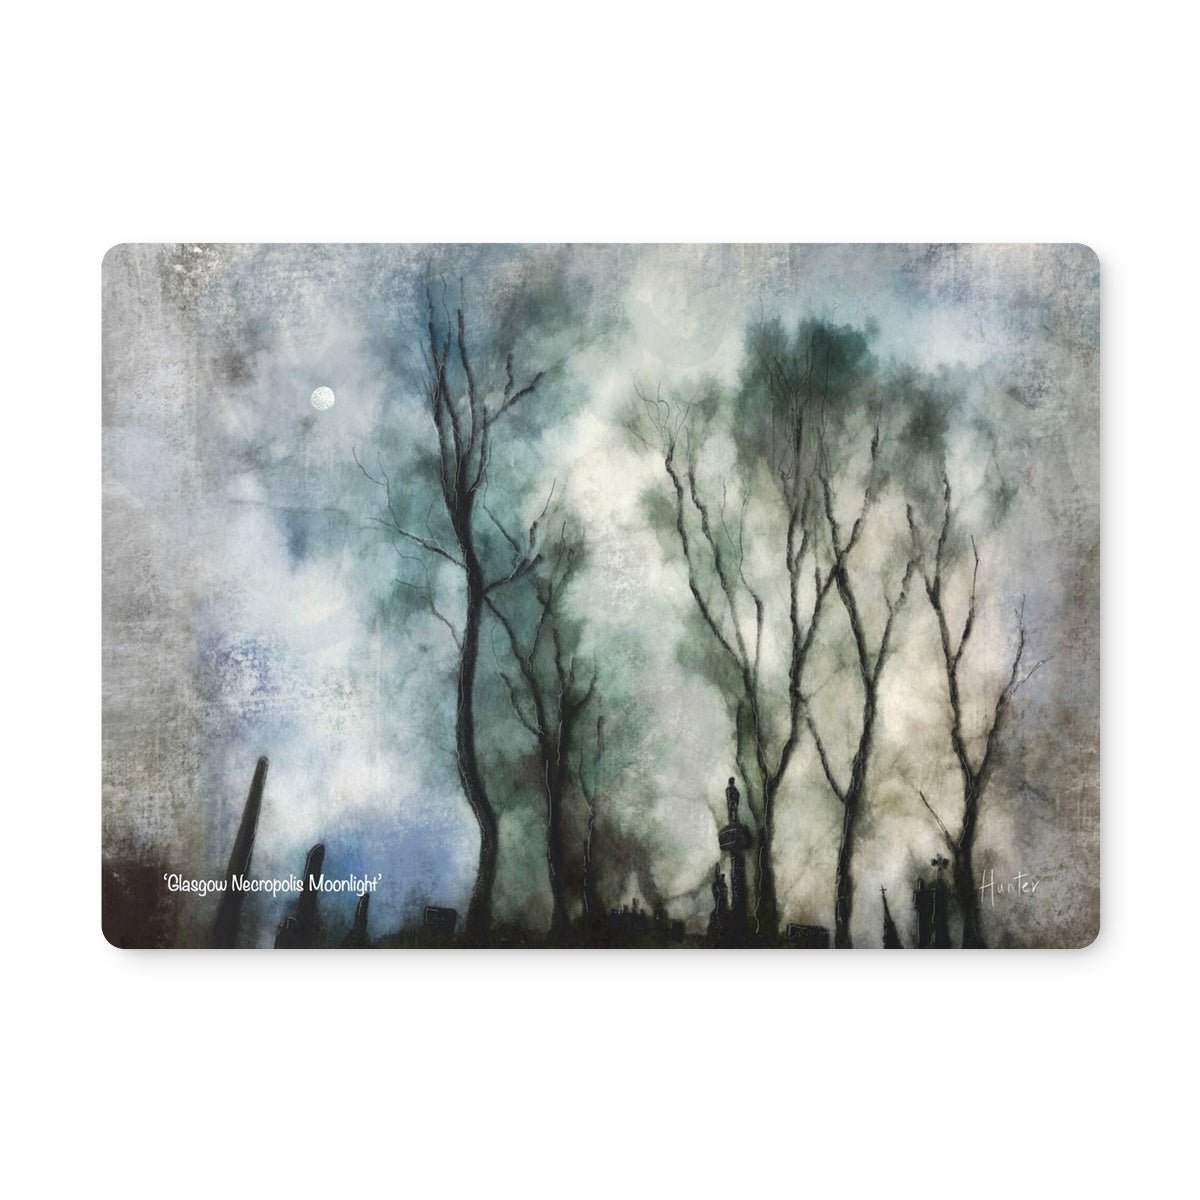 Glasgow Necropolis Moonlight Art Gifts Placemat-Placemats-Edinburgh & Glasgow Art Gallery-2 Placemats-Paintings, Prints, Homeware, Art Gifts From Scotland By Scottish Artist Kevin Hunter